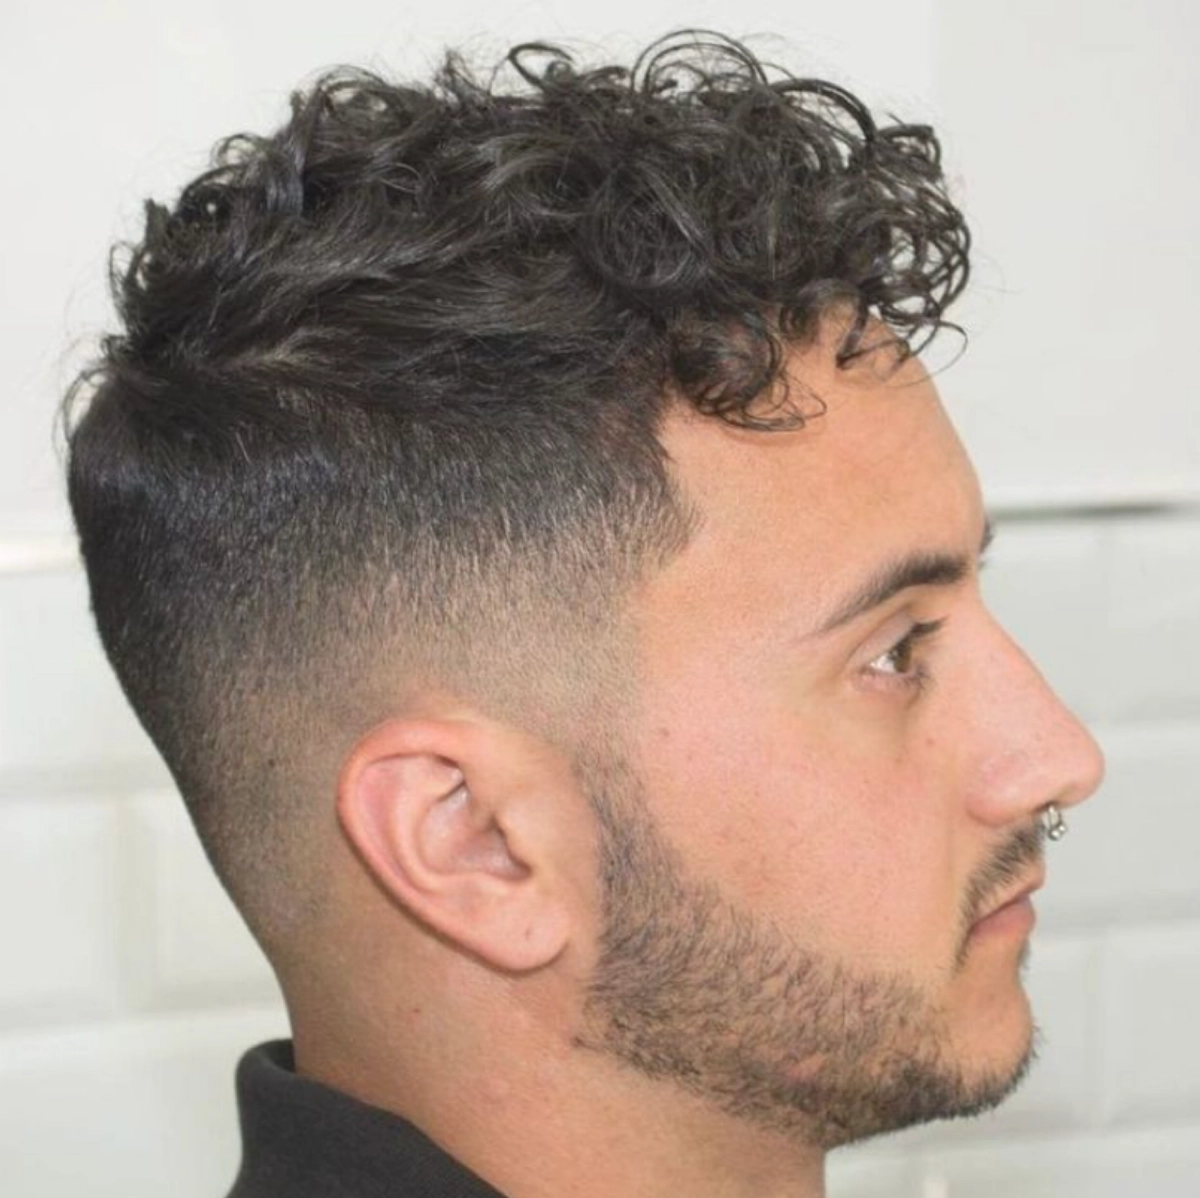 Best Short Curly Hairstyle for Men l Men's Short Haircuts with Curly Hair –  Men Deserve